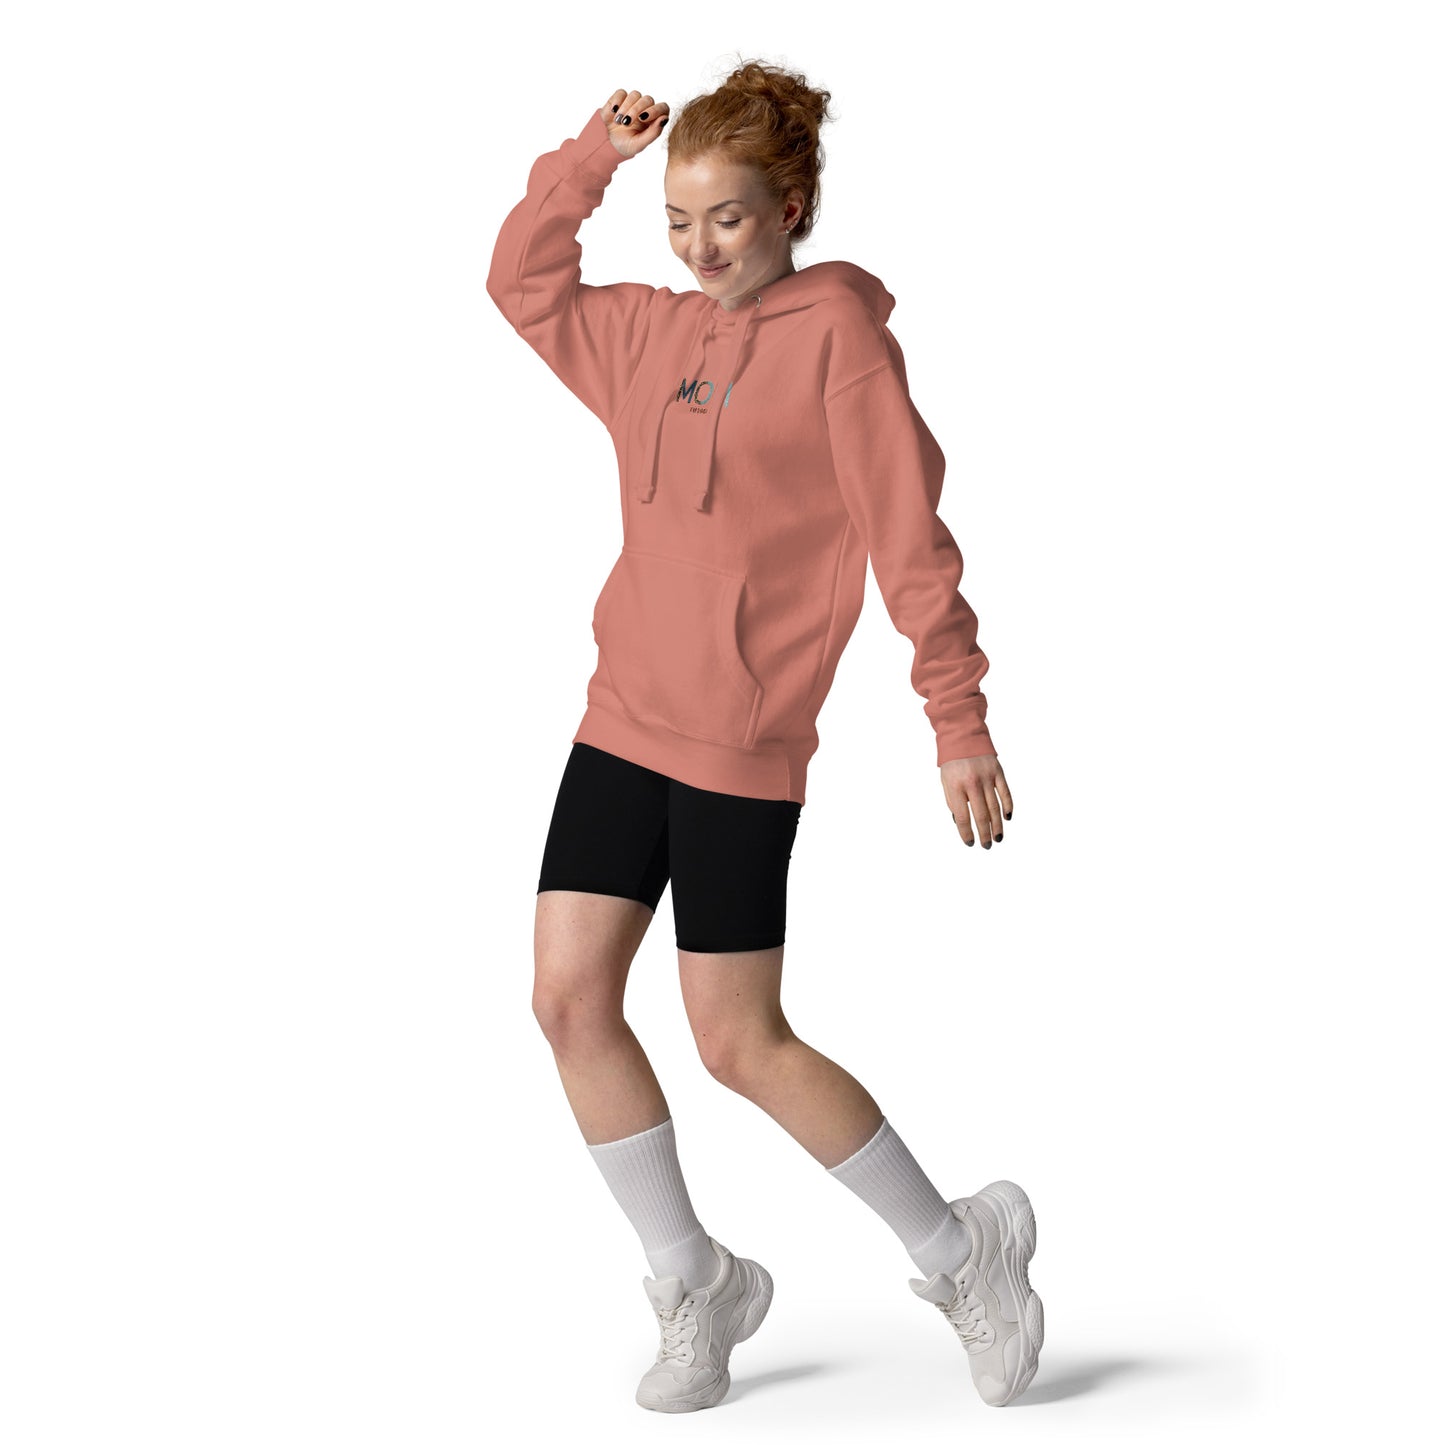 MOM Unisex Hoodie - Dusty Rose / S - Shirts & Tops